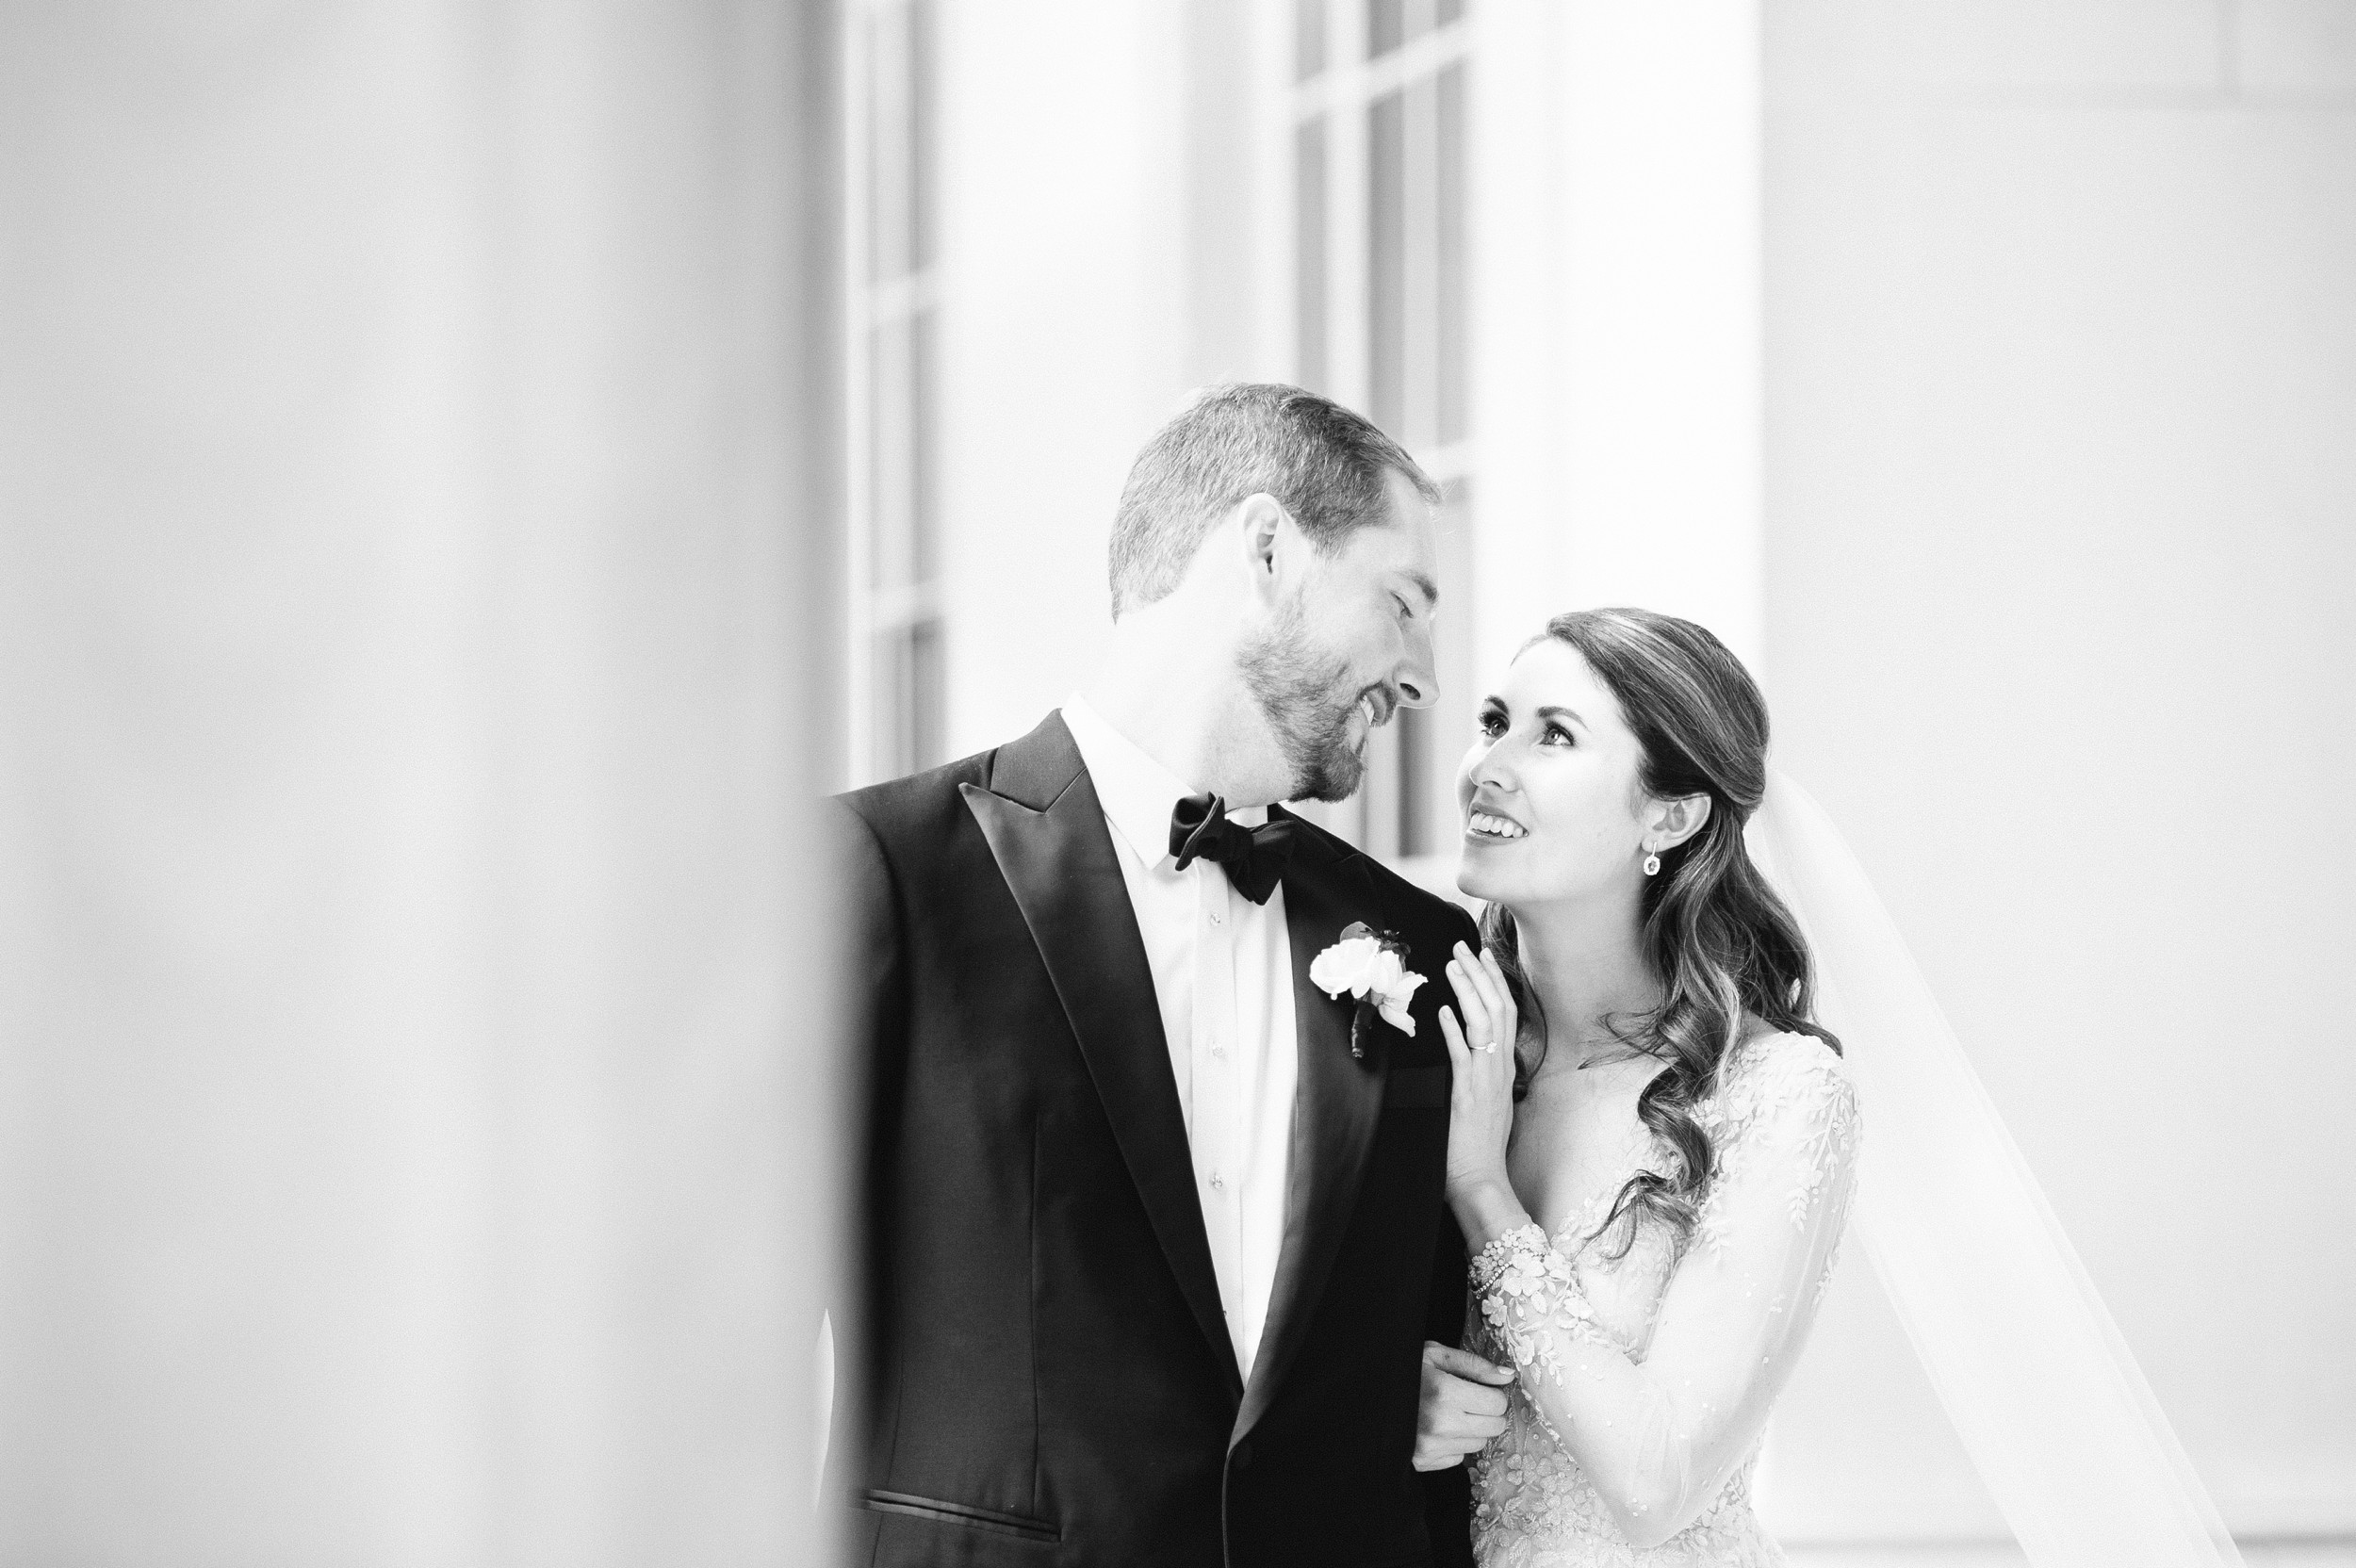 Boston bride and groom couples portraits at MIT for Harvard Art Museum Wedding black and white